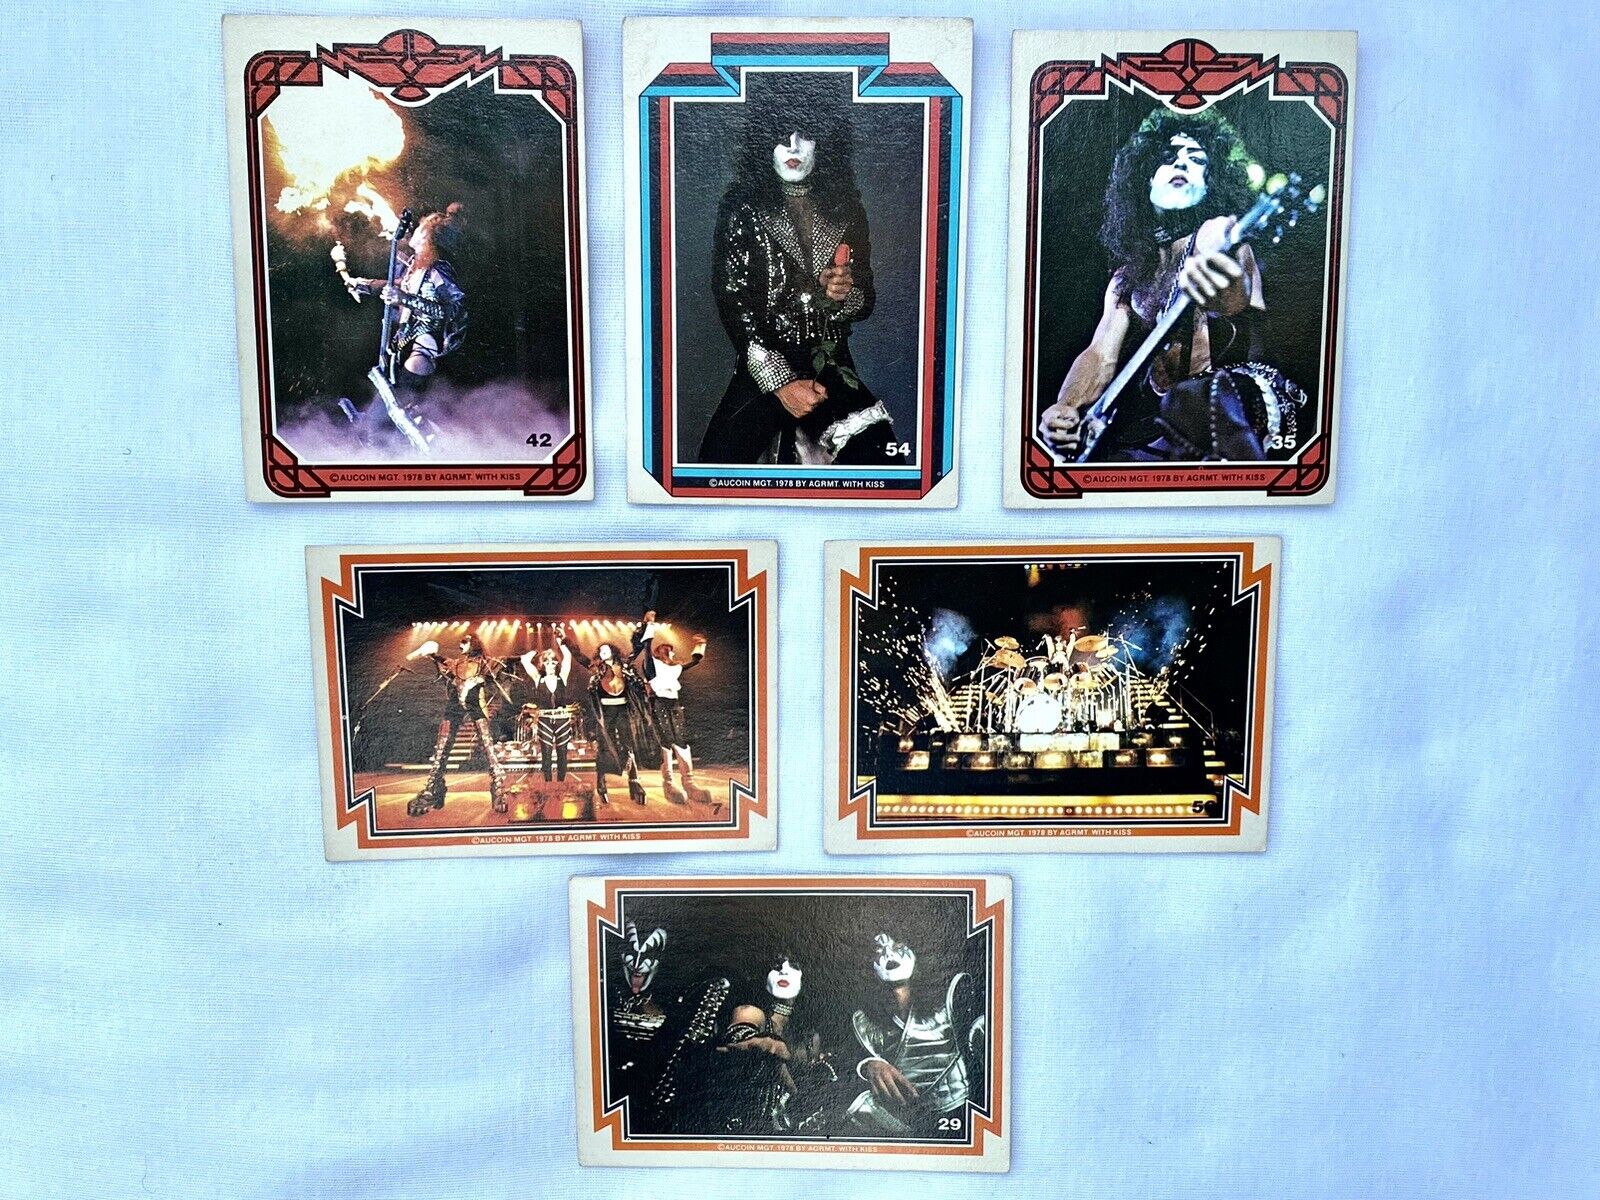 Vintage KISS Rock Band Trading Cards Aucoin Mgt 1978 Mixed Lot 6 Pieces